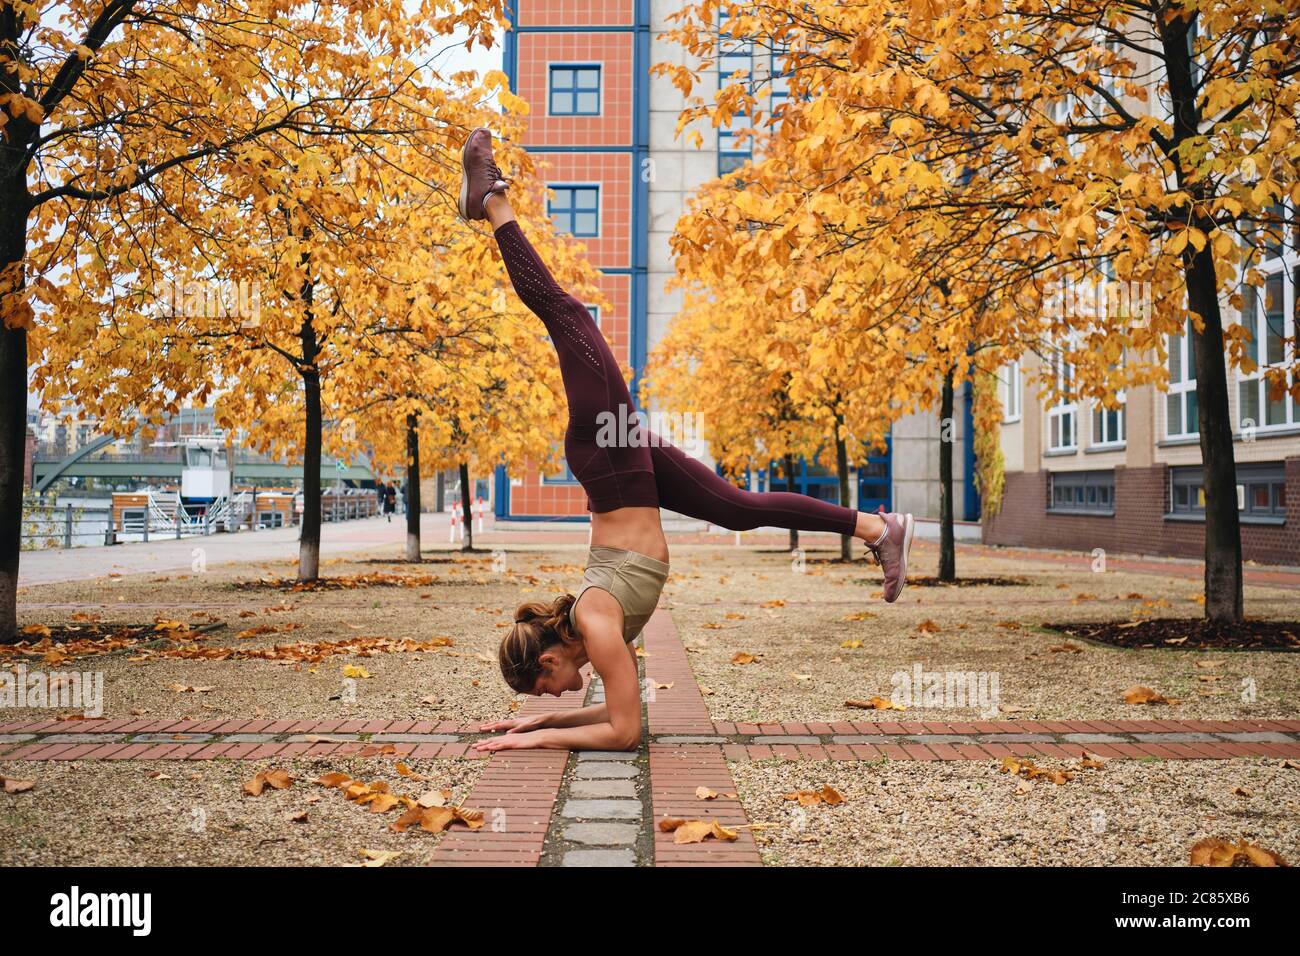 Beautiful girl in sportswear standing on hands during yoga practice on autumn city street Stock Photo